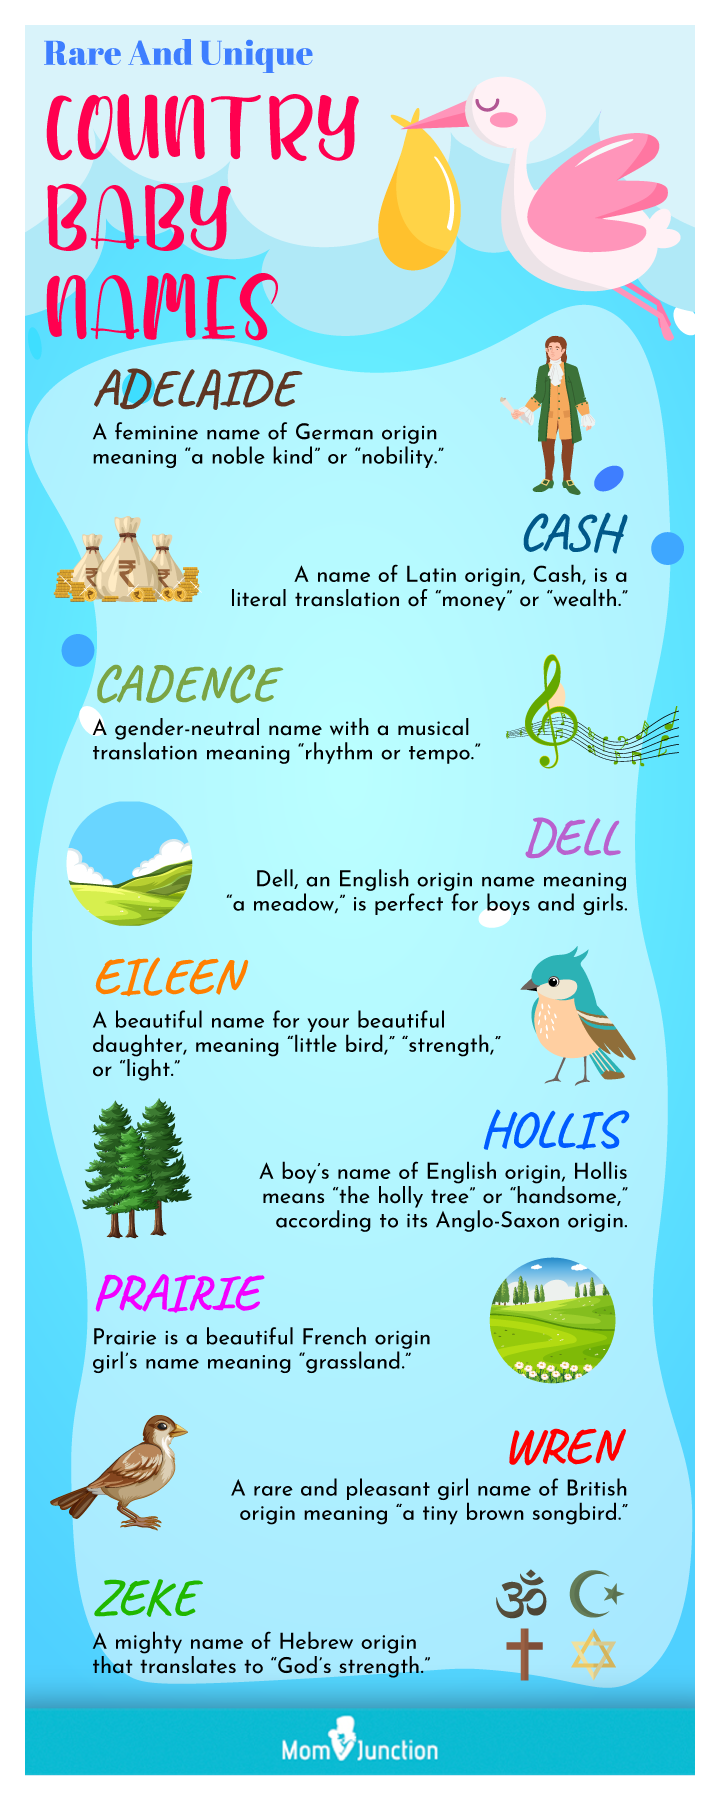 country baby names (infographic)